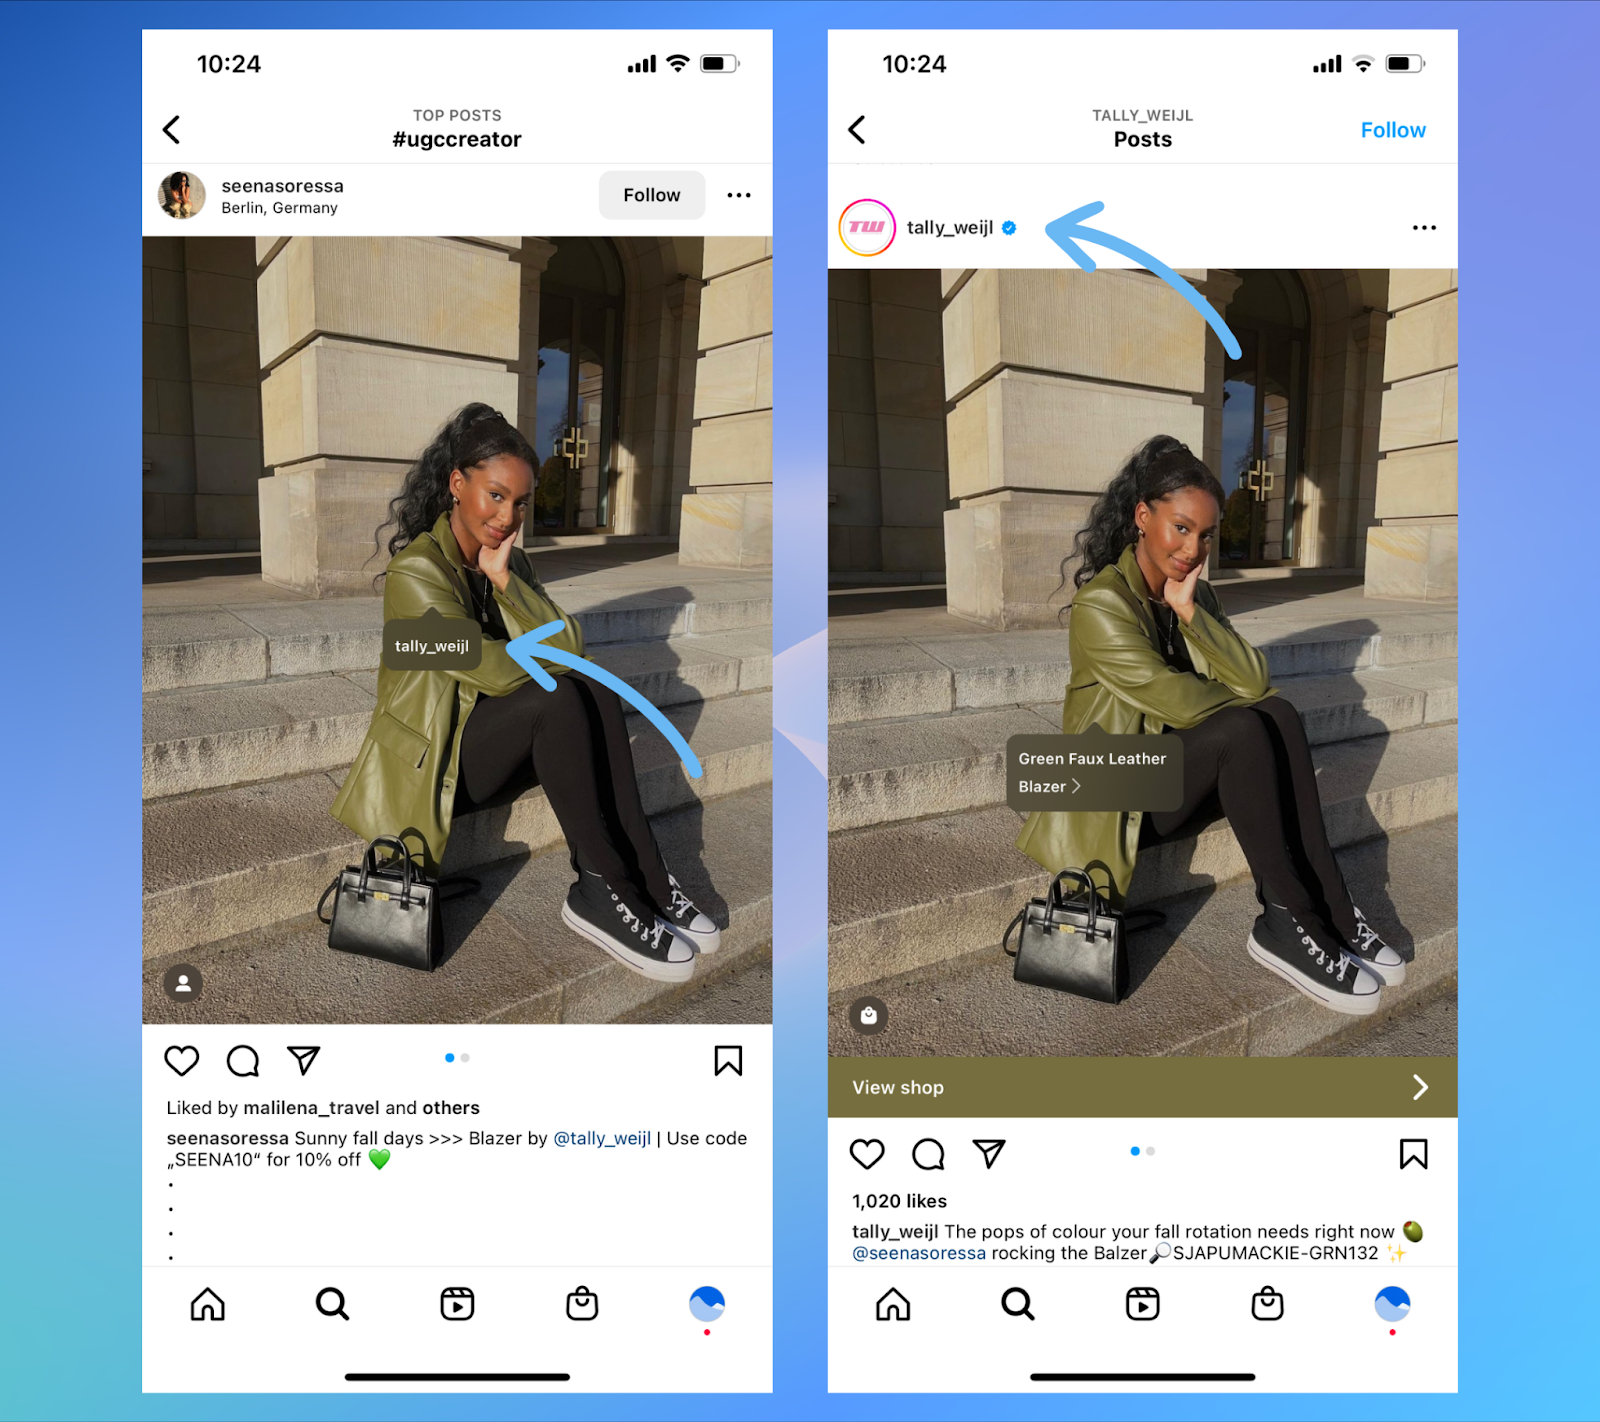 What is a UGC Creator on Instagram and TikTok?